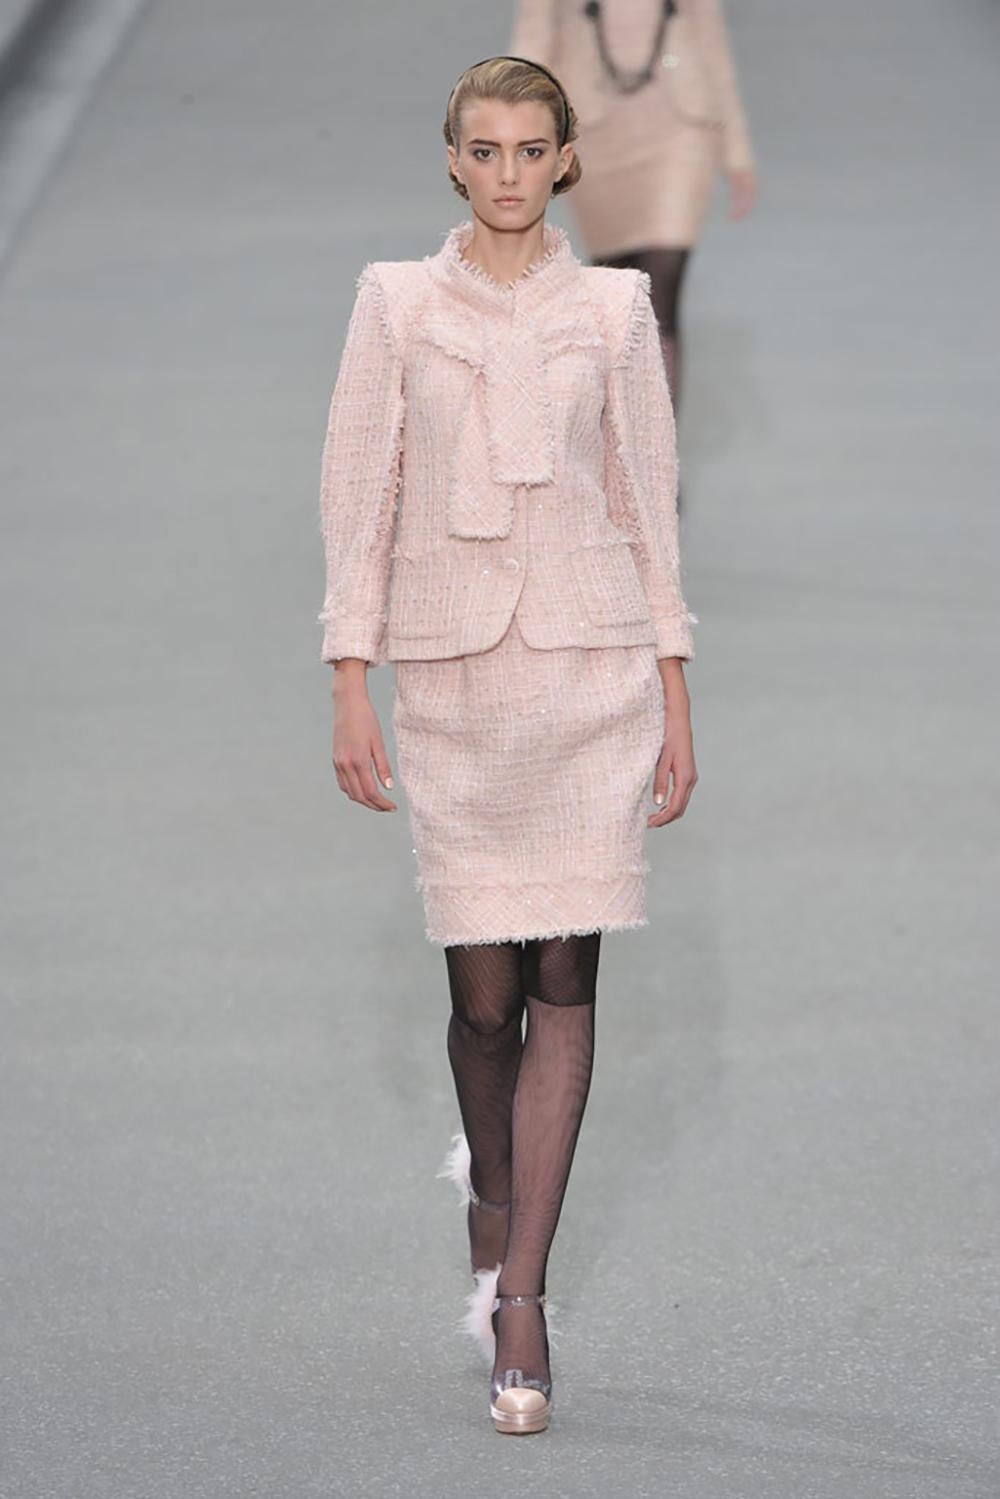 New fabulous Chanel ribbon tweed jacket and skirt set from Runway of 2009 Spring Collection. Retail price of the jacket 8,860$, skirt 3,670$
Today's boutique pricce for ribbon tweed jacket starts at 16,000$.
Size mark of both pieces 42 FR. Never